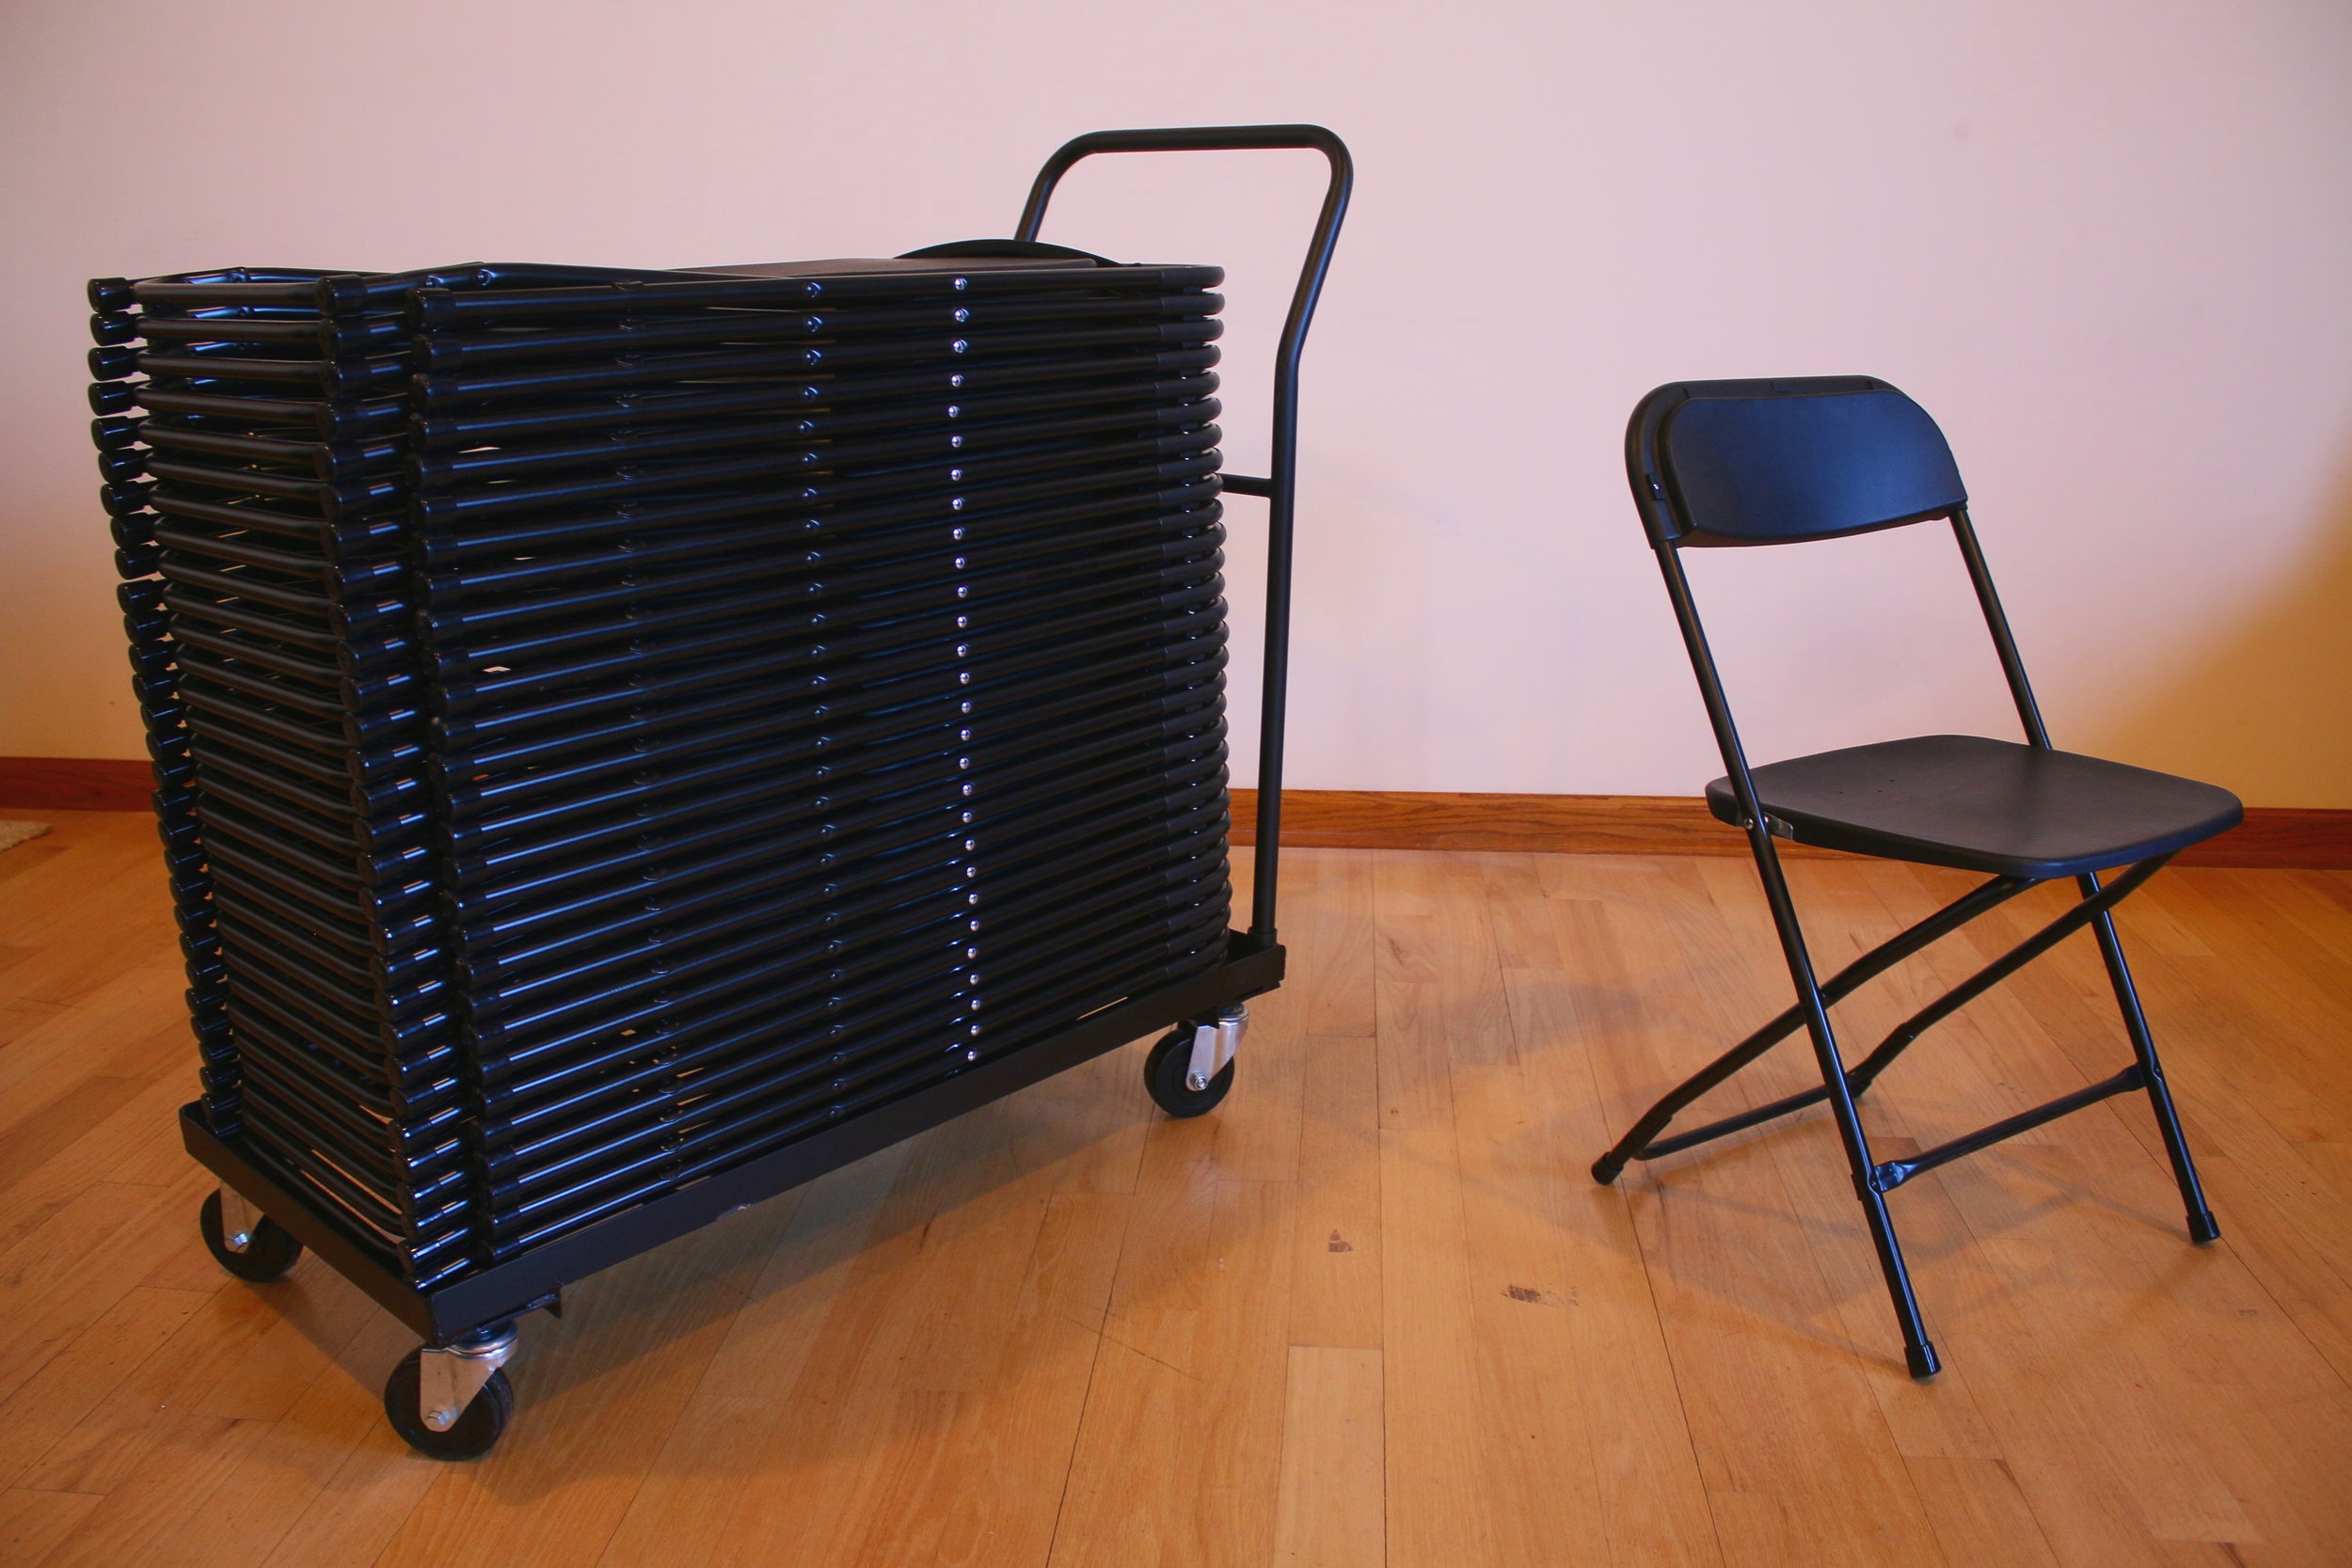 30 additional folding chairs, for seating up to 40 total